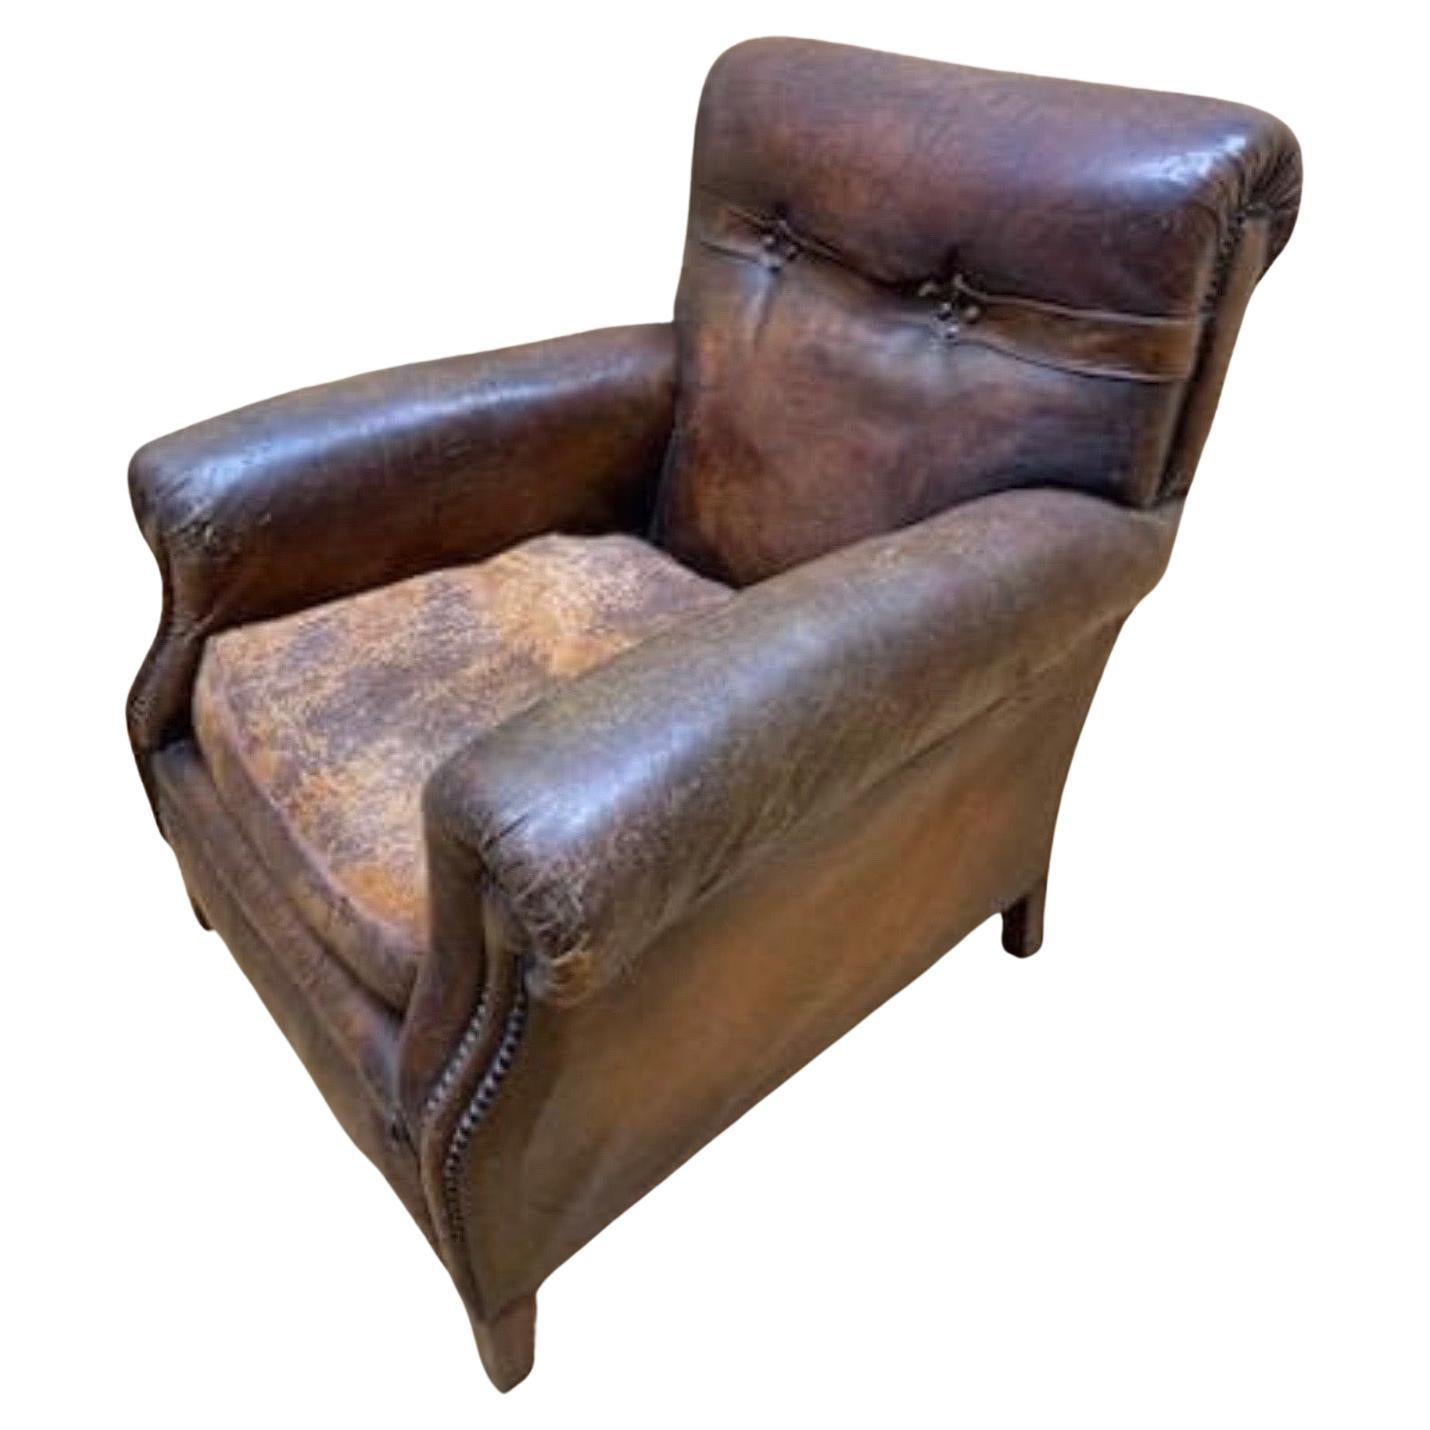 French Art Deco Distressed Brown Leather Club Chair For Sale